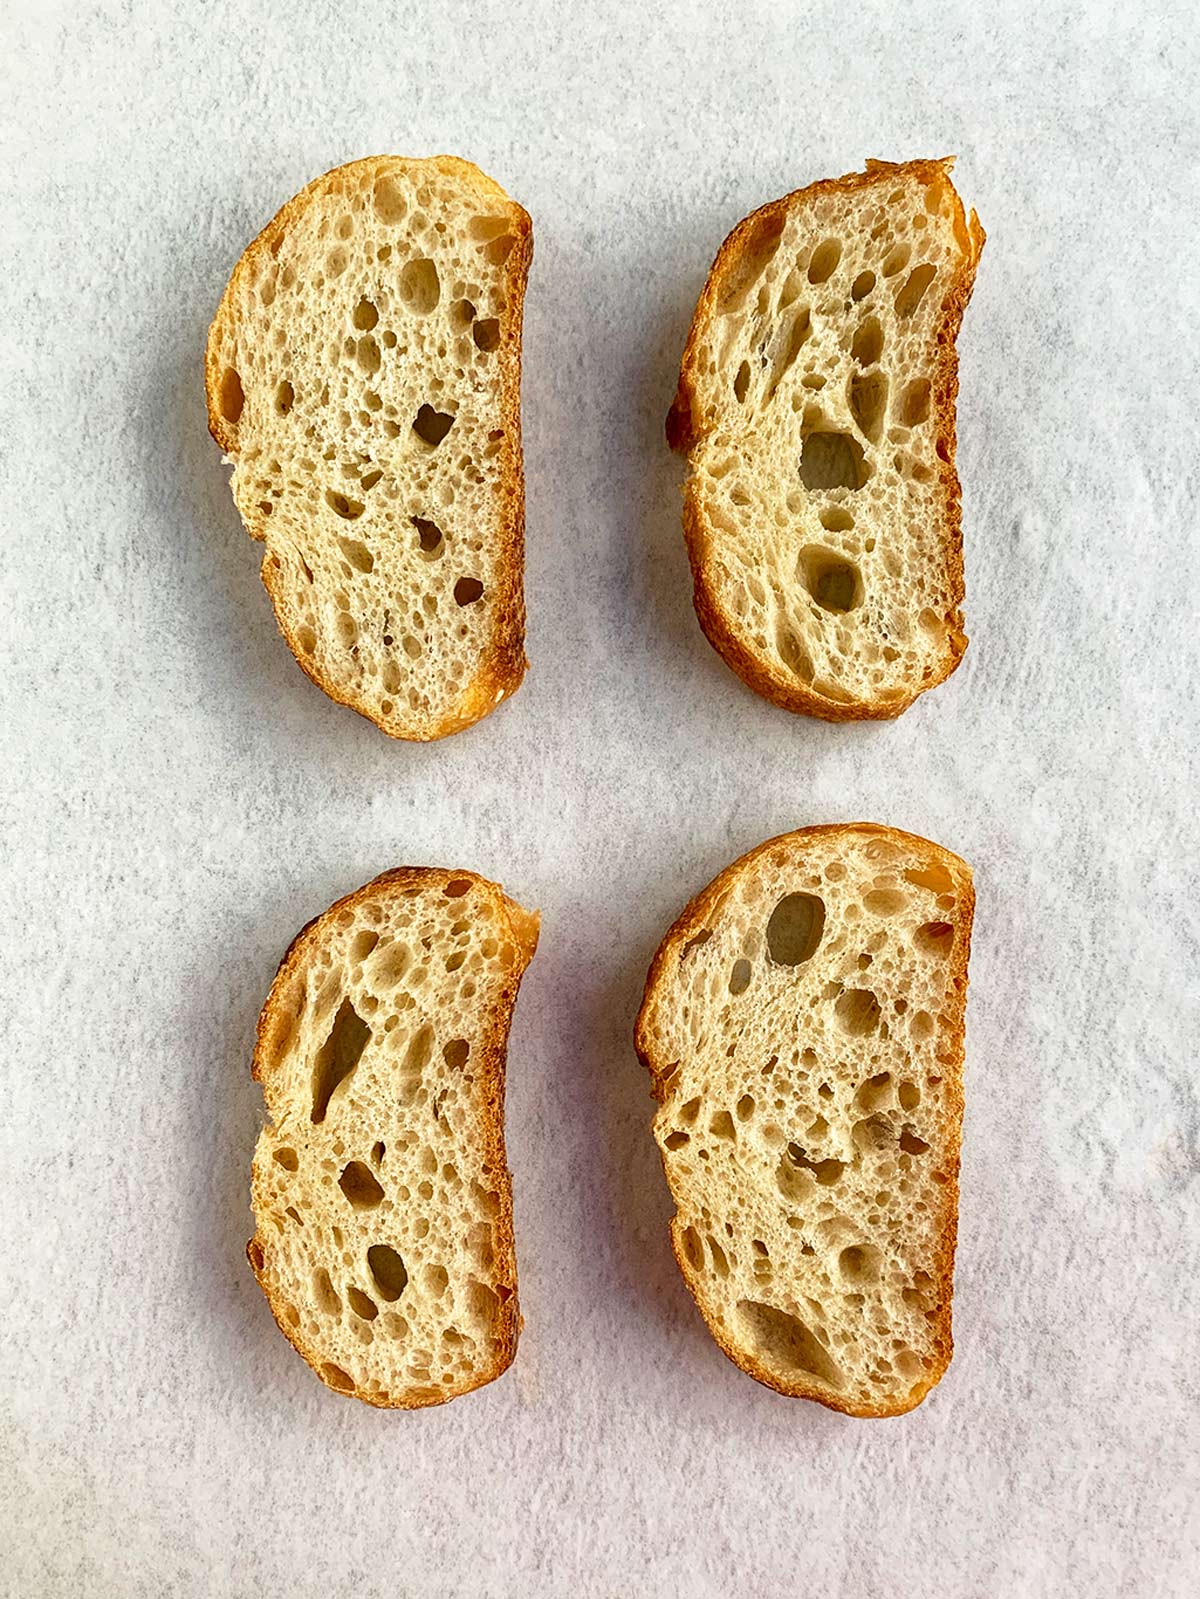 Plain mini toasts on white background, before topping.